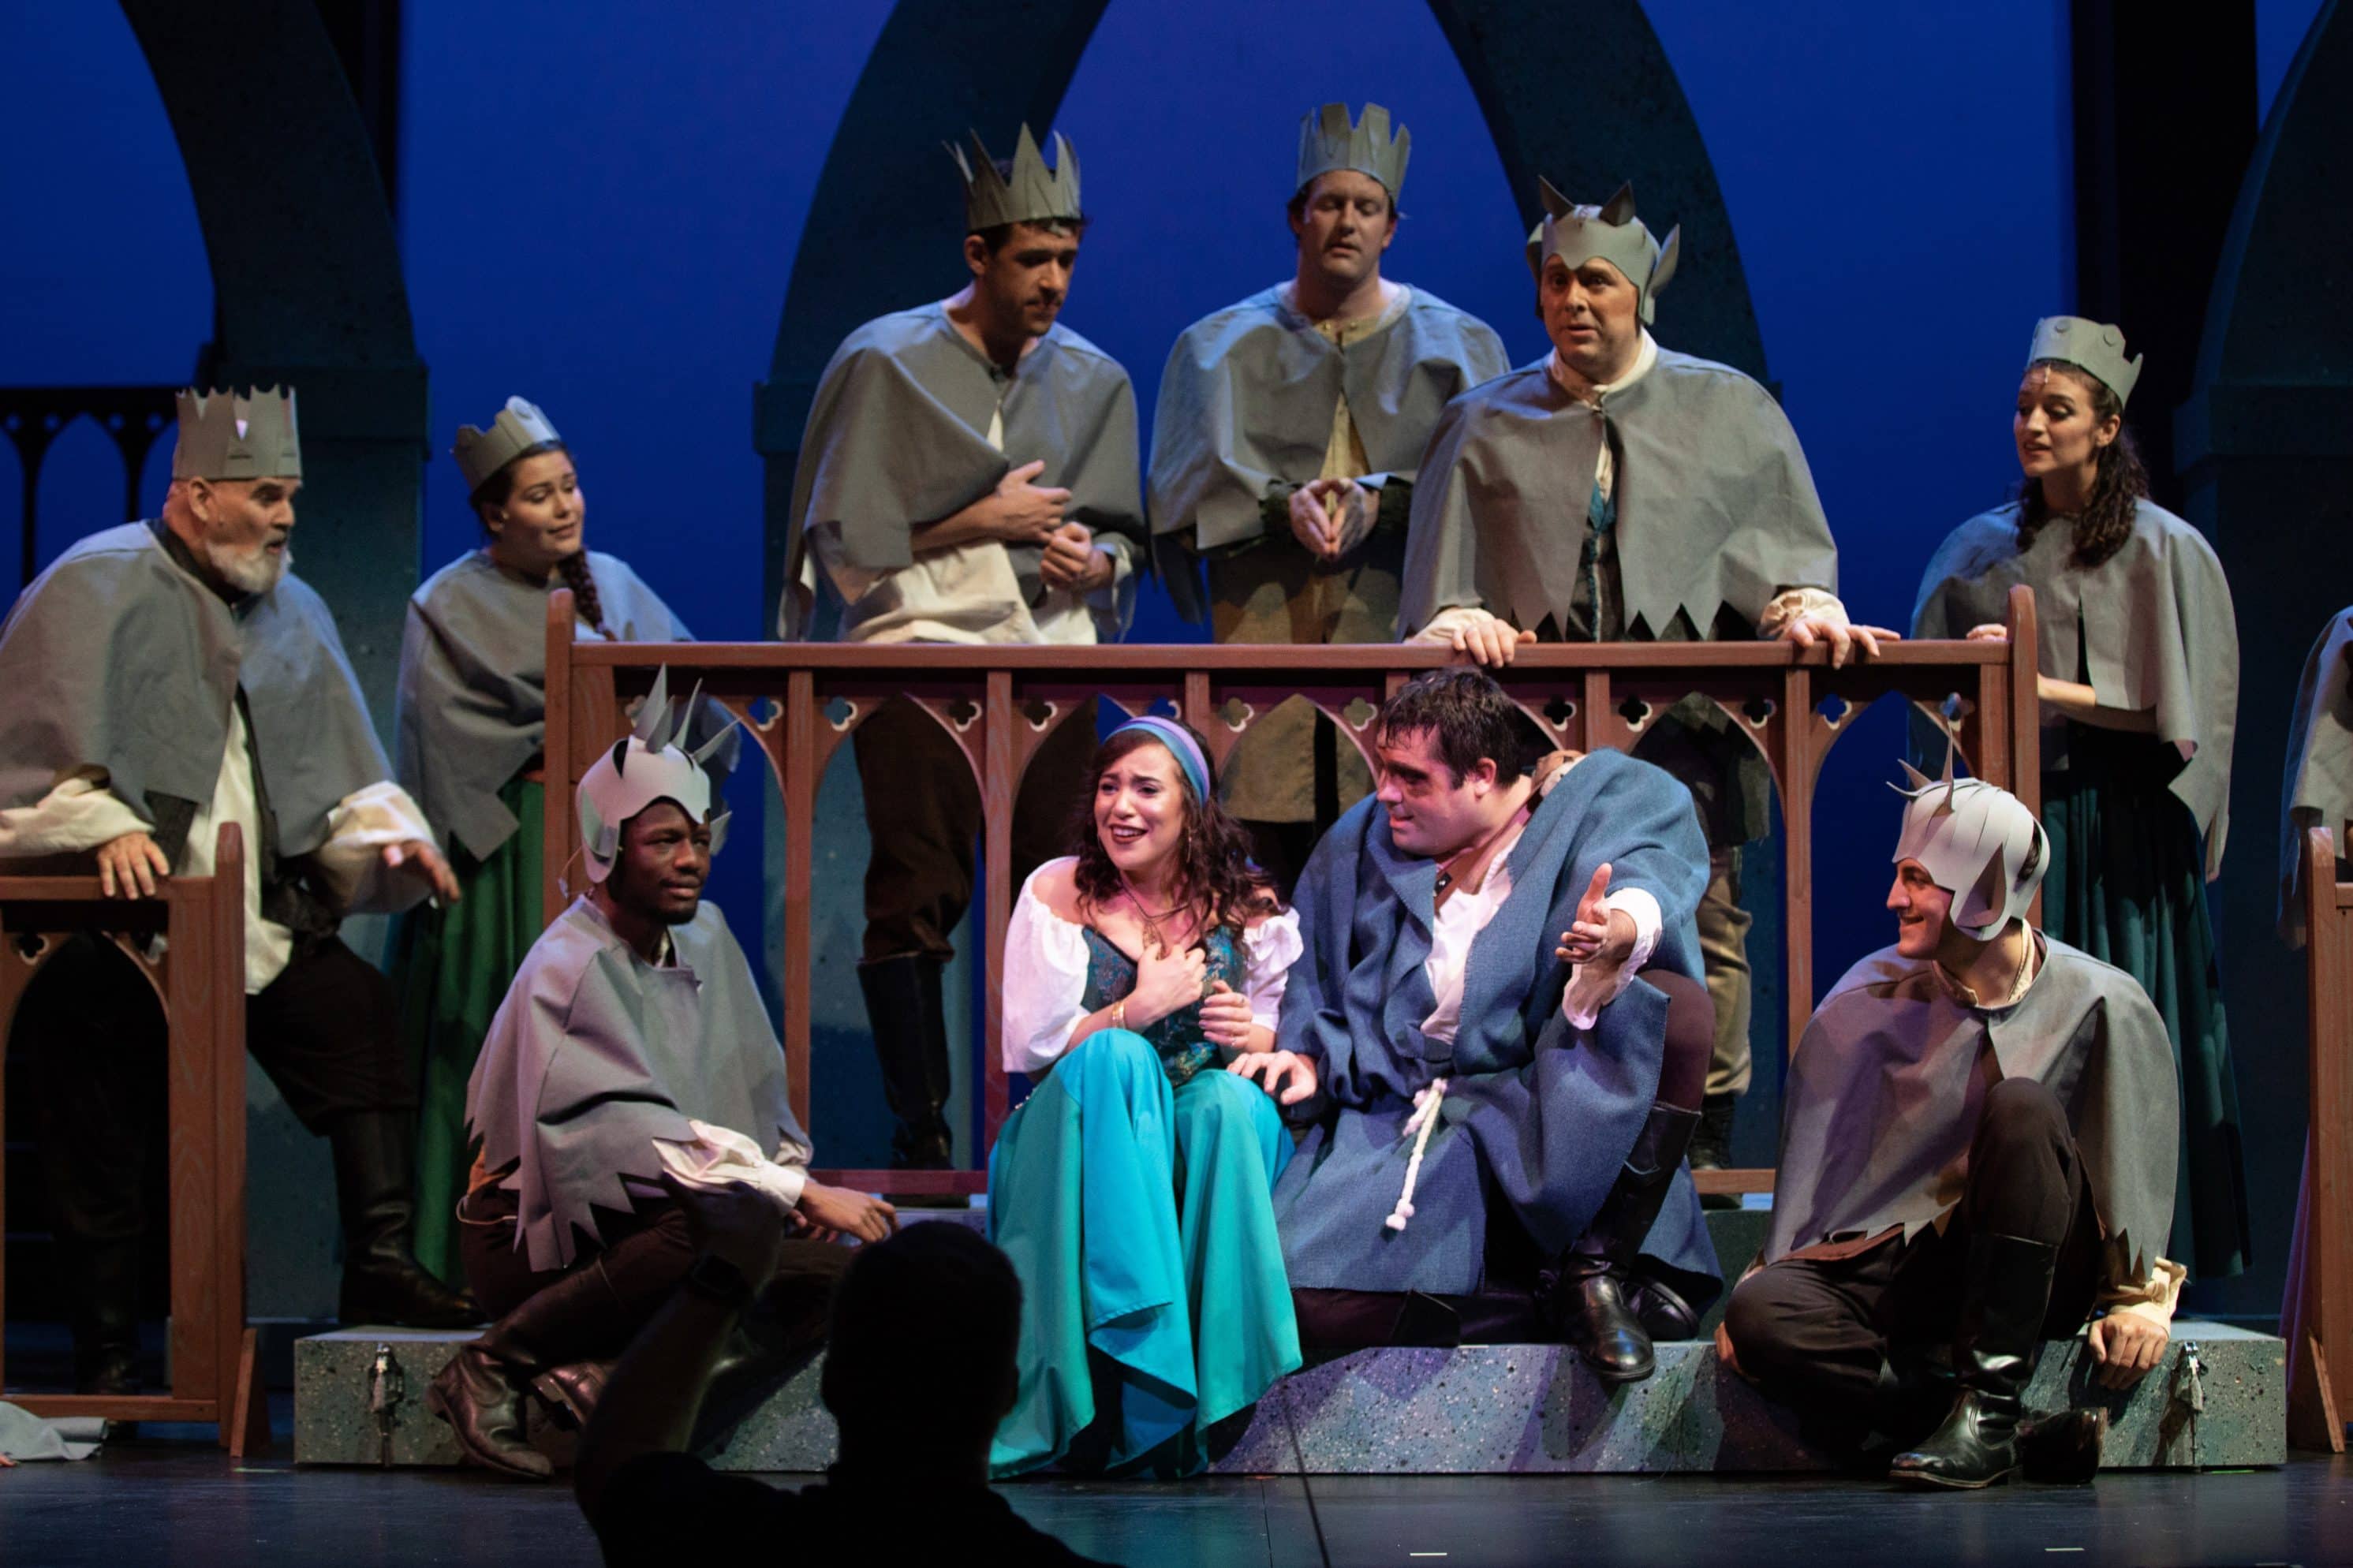 Alex Bryce as Quasimodo, Adelina Mitchell as Esmerelda, surrounded by members of the ensemble. Photo by Peter Hill. 